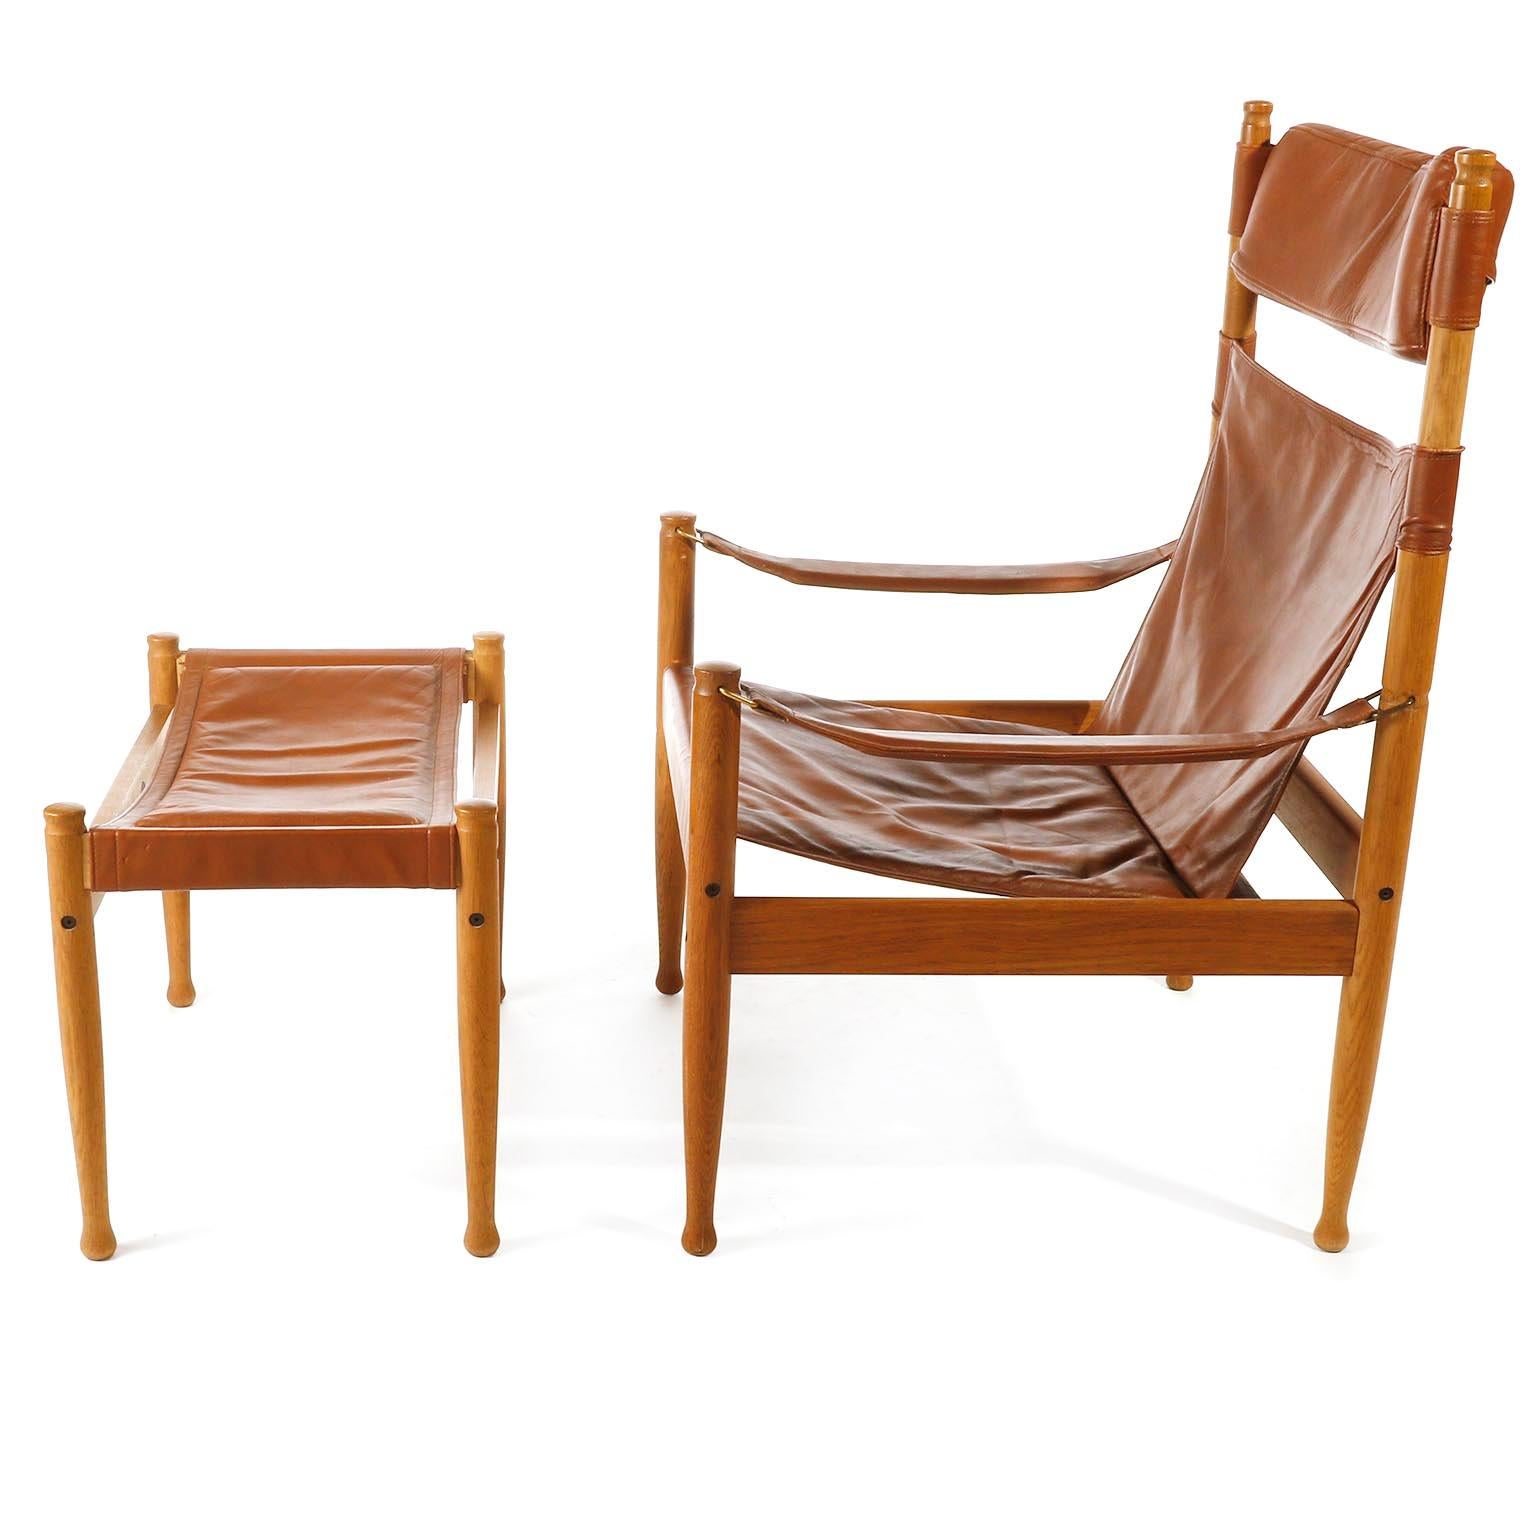 A fantastic highback safari lounge chair with ottoman in oak or elm and wonderful warm toned cognac leather designed by Erik Wørts for Niels Eilersen, Denmark, manufactured in midcentury, circa 1960 (late 1950s or early 1960s).
A very dynamic